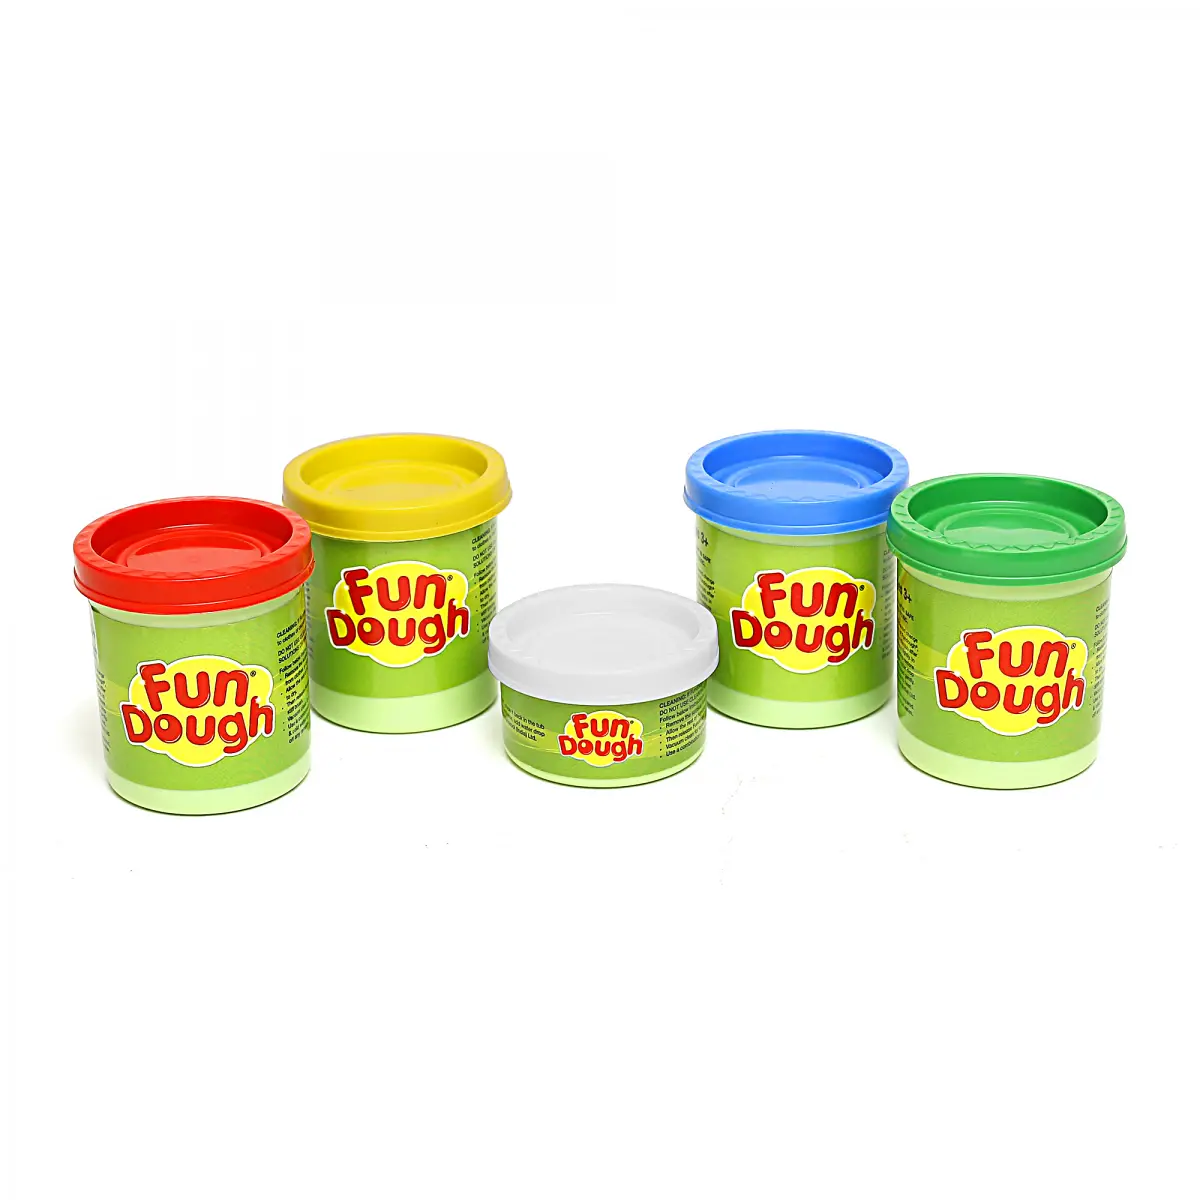 Funskool Fun Dough The Movie Dough Show with 1 tub of 25g & 4 tubs of 50g each & Accessories, 3Y+, Multicolour